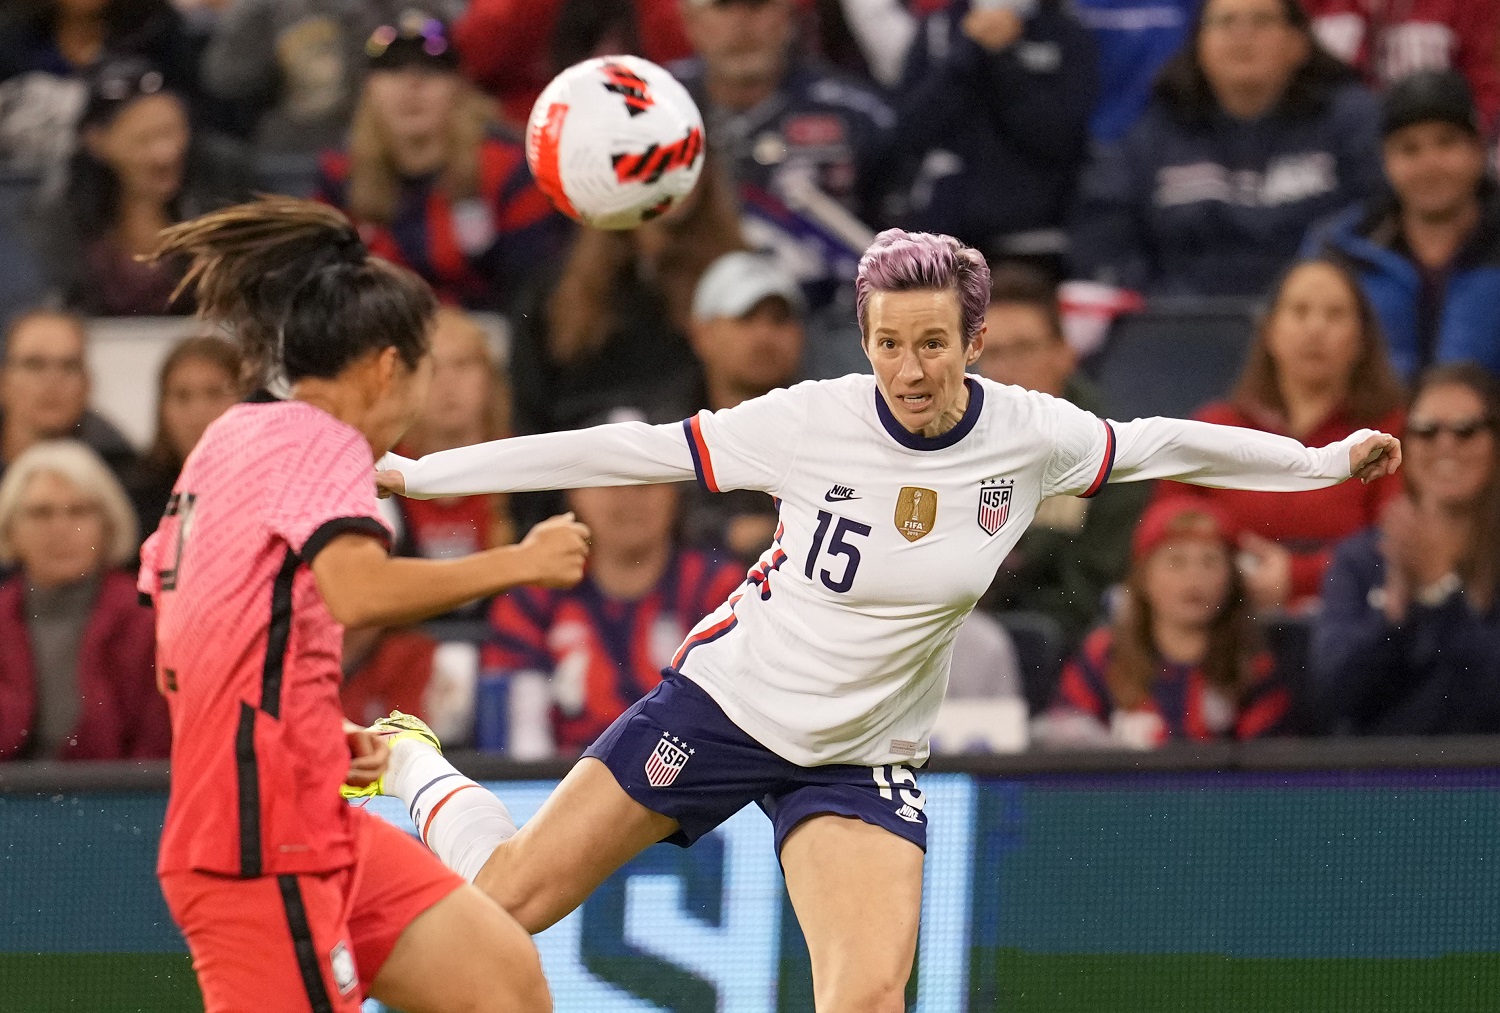 Megan Rapinoe heads a ball during a game against South Korea on Oct. 21, 2021, in Kansas City, Kansas. | Brad Smith/ISI Photos/Getty Images)